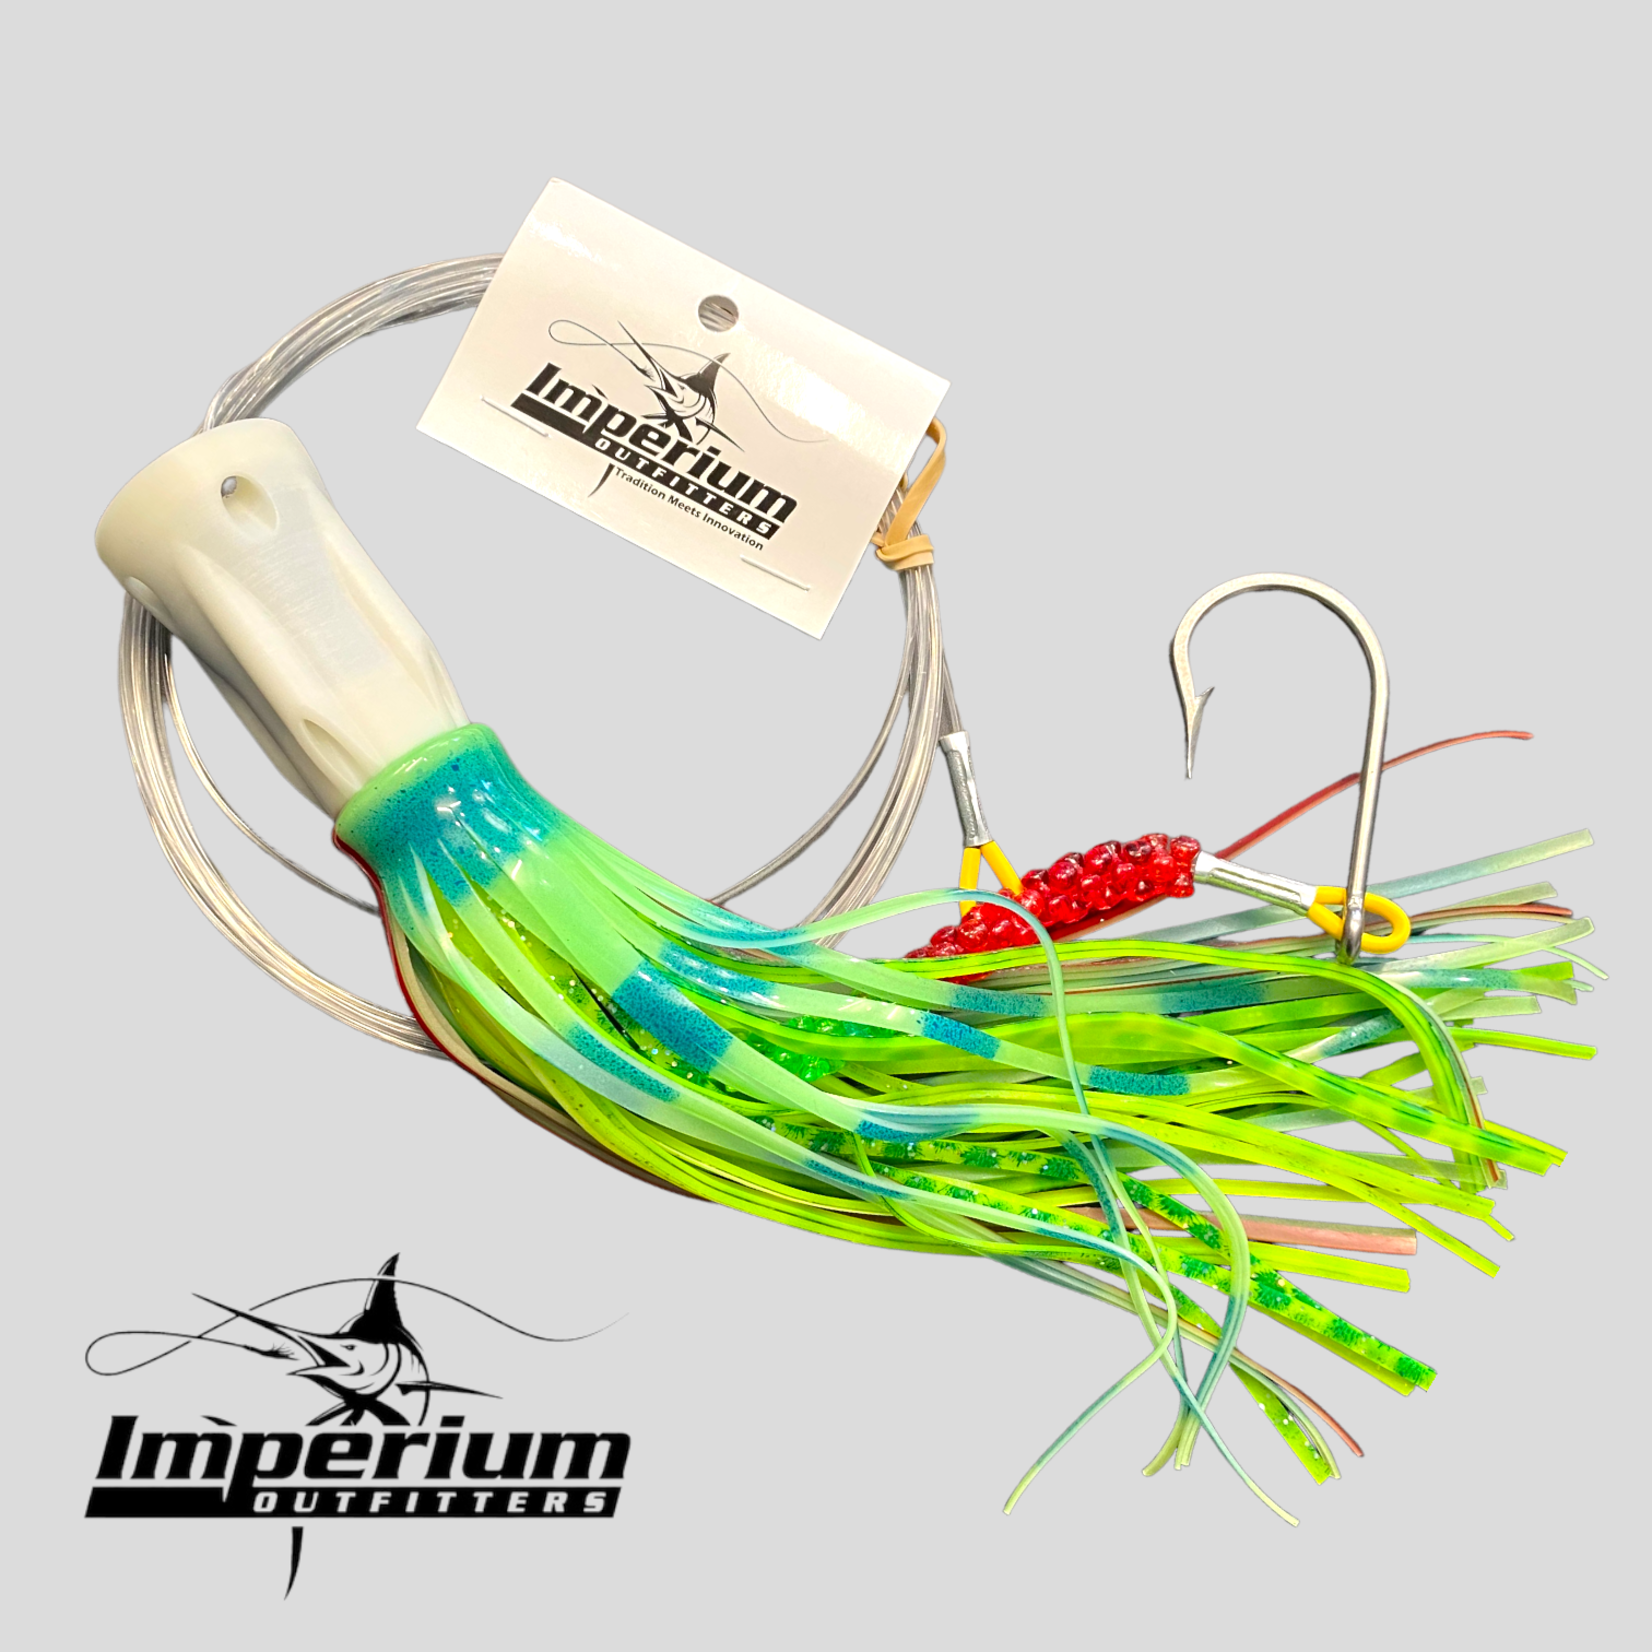 Imperium Outfitters Imperium S3 Smoker